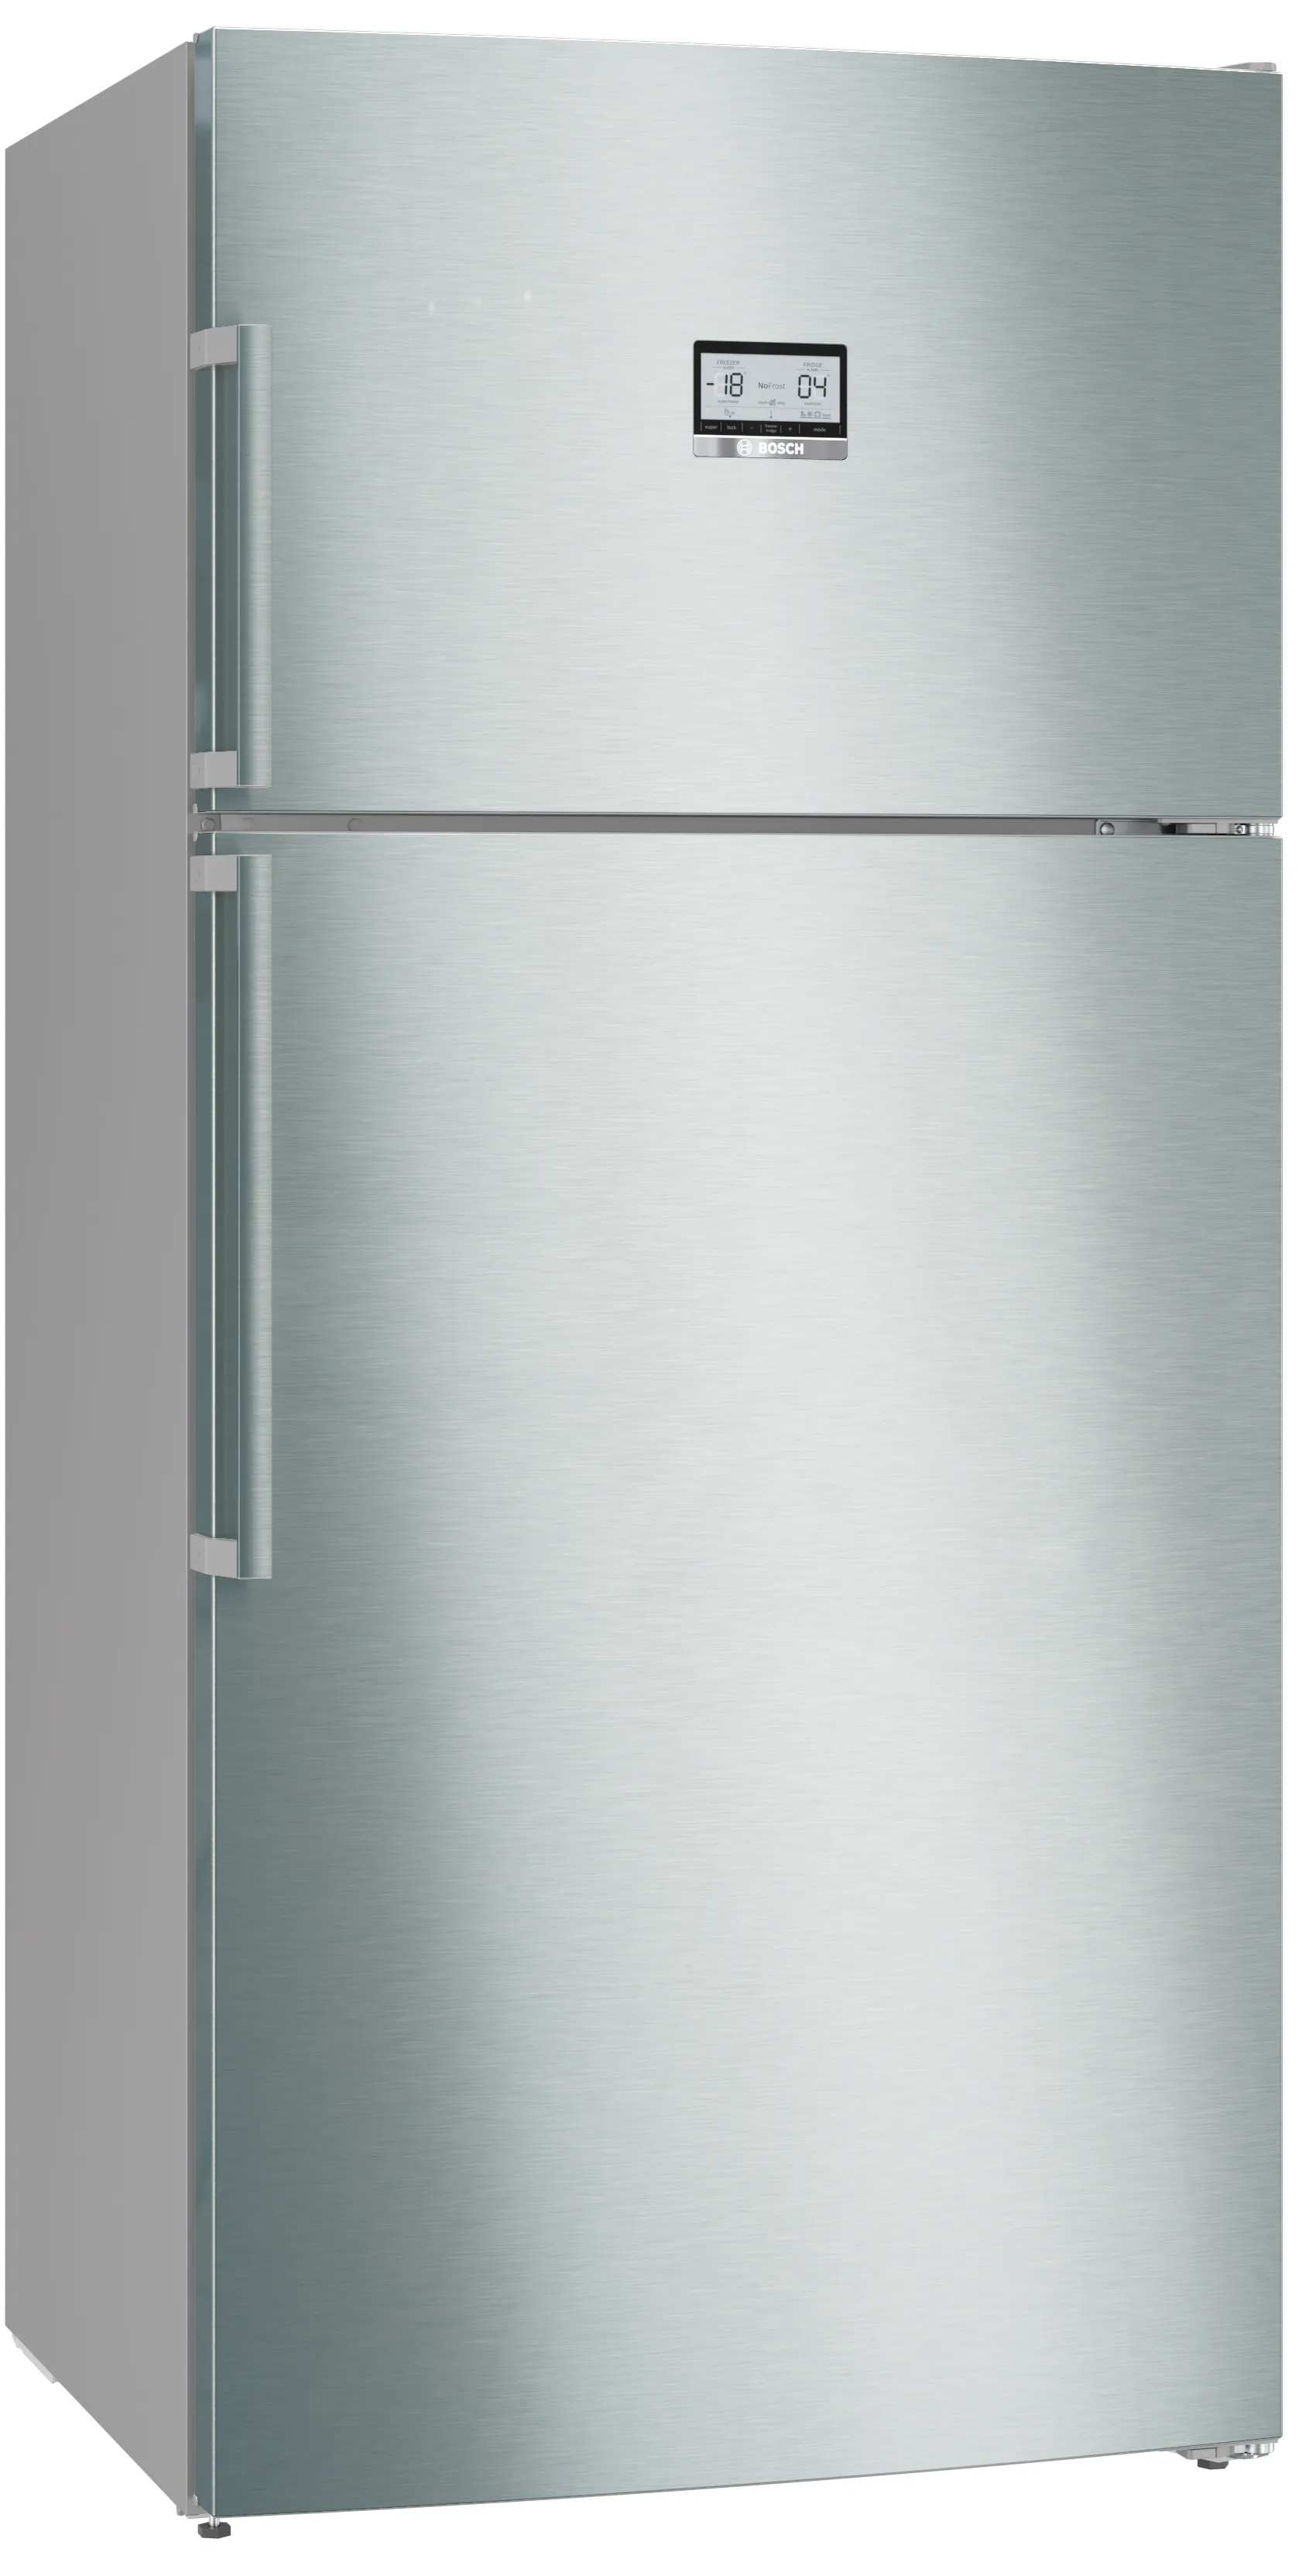 Series 6 free-standing fridge-freezer with freezer at top 186 x 86 cm Stainless steel (with anti-fingerprint) 